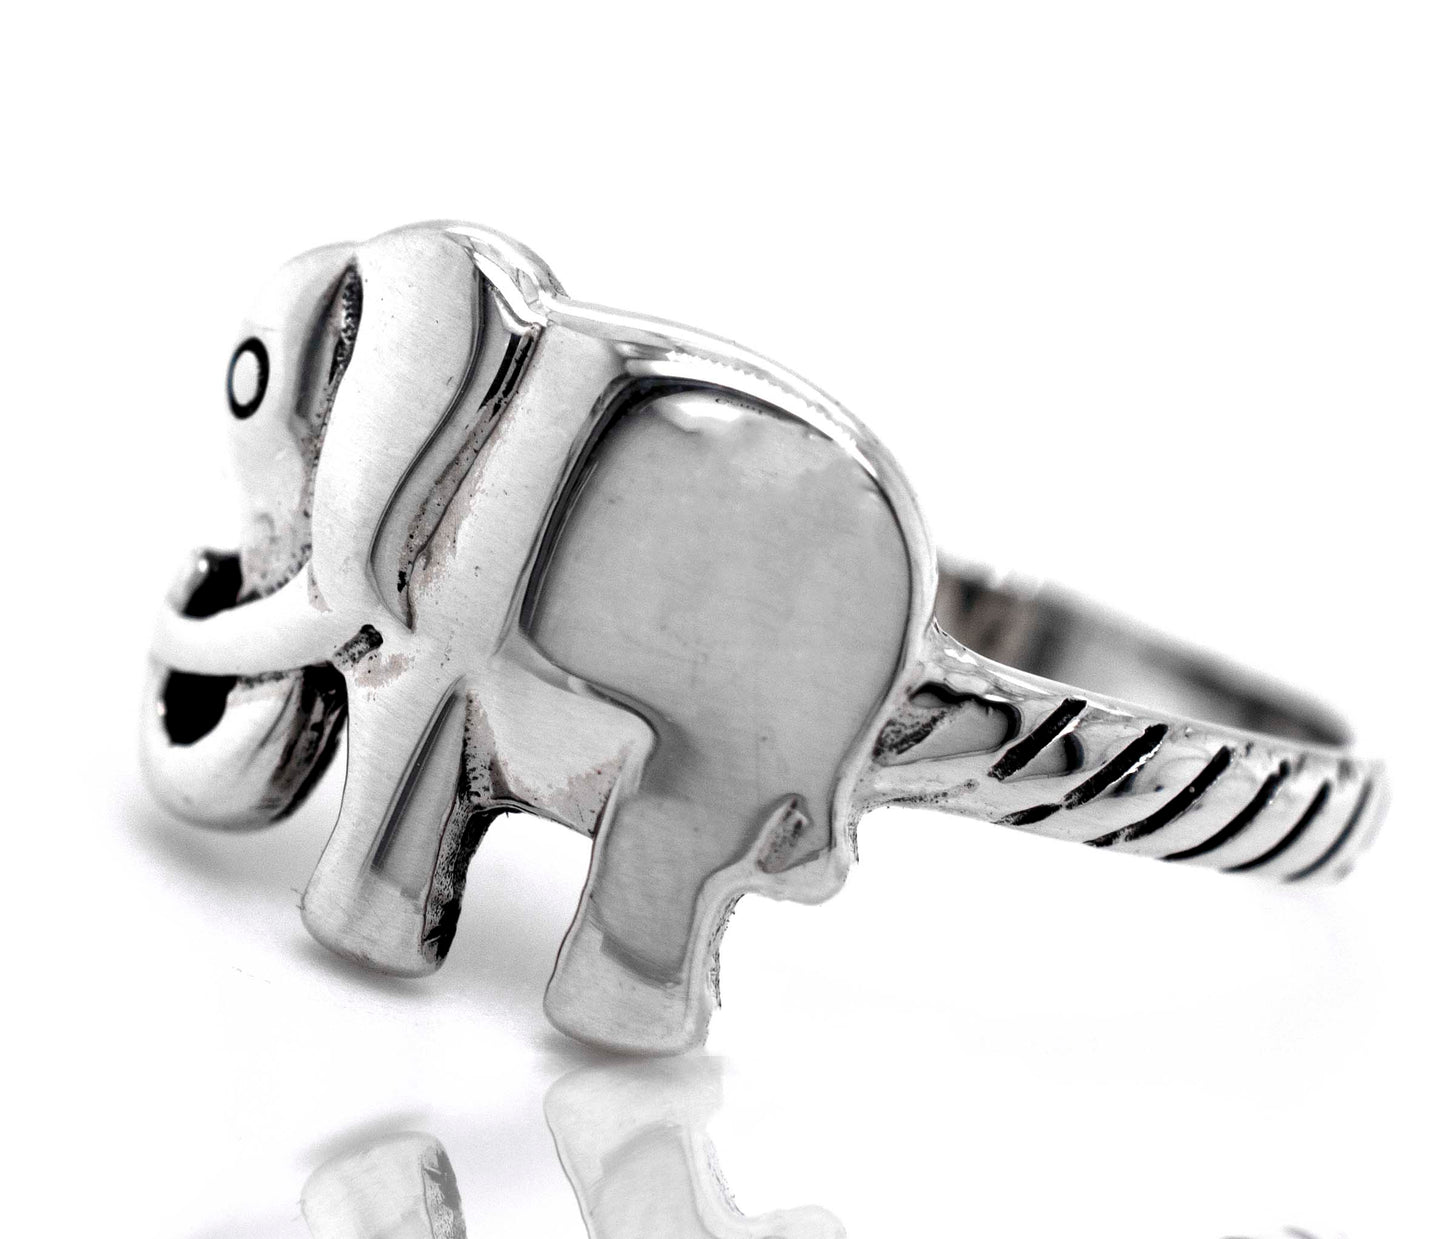 A Super Silver elephant ring on a white background.